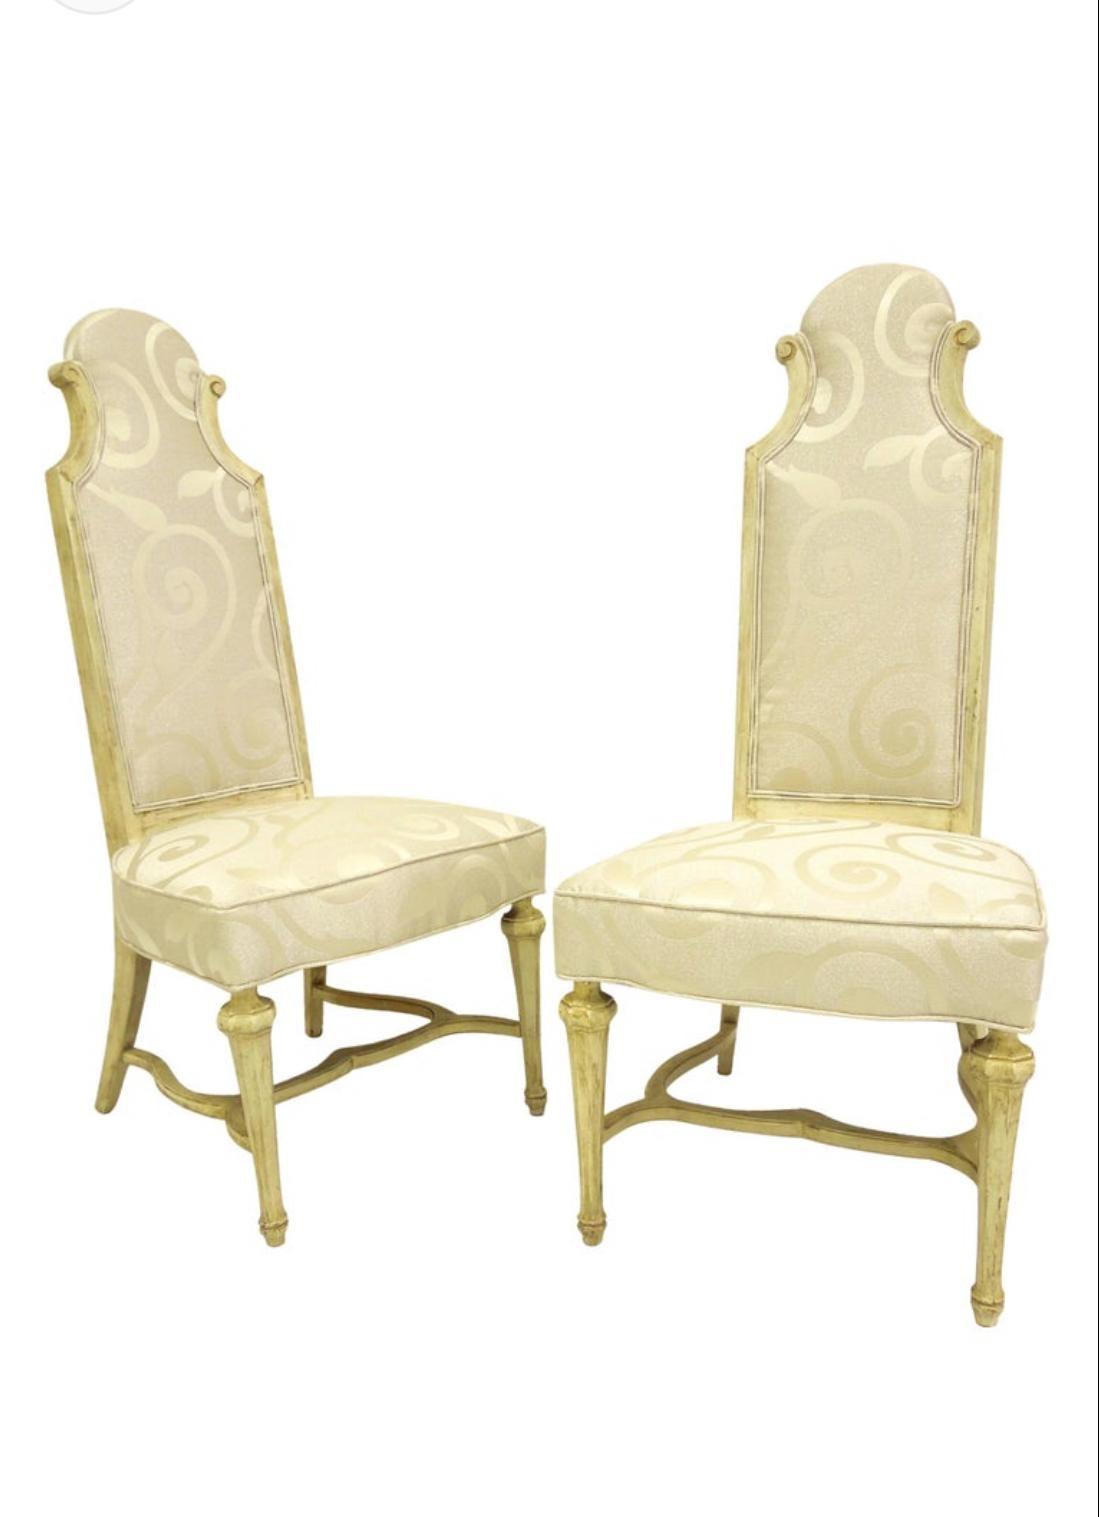 Wood Vintage Hollywood Regency High Back Pair of Game/Side Chairs For Sale